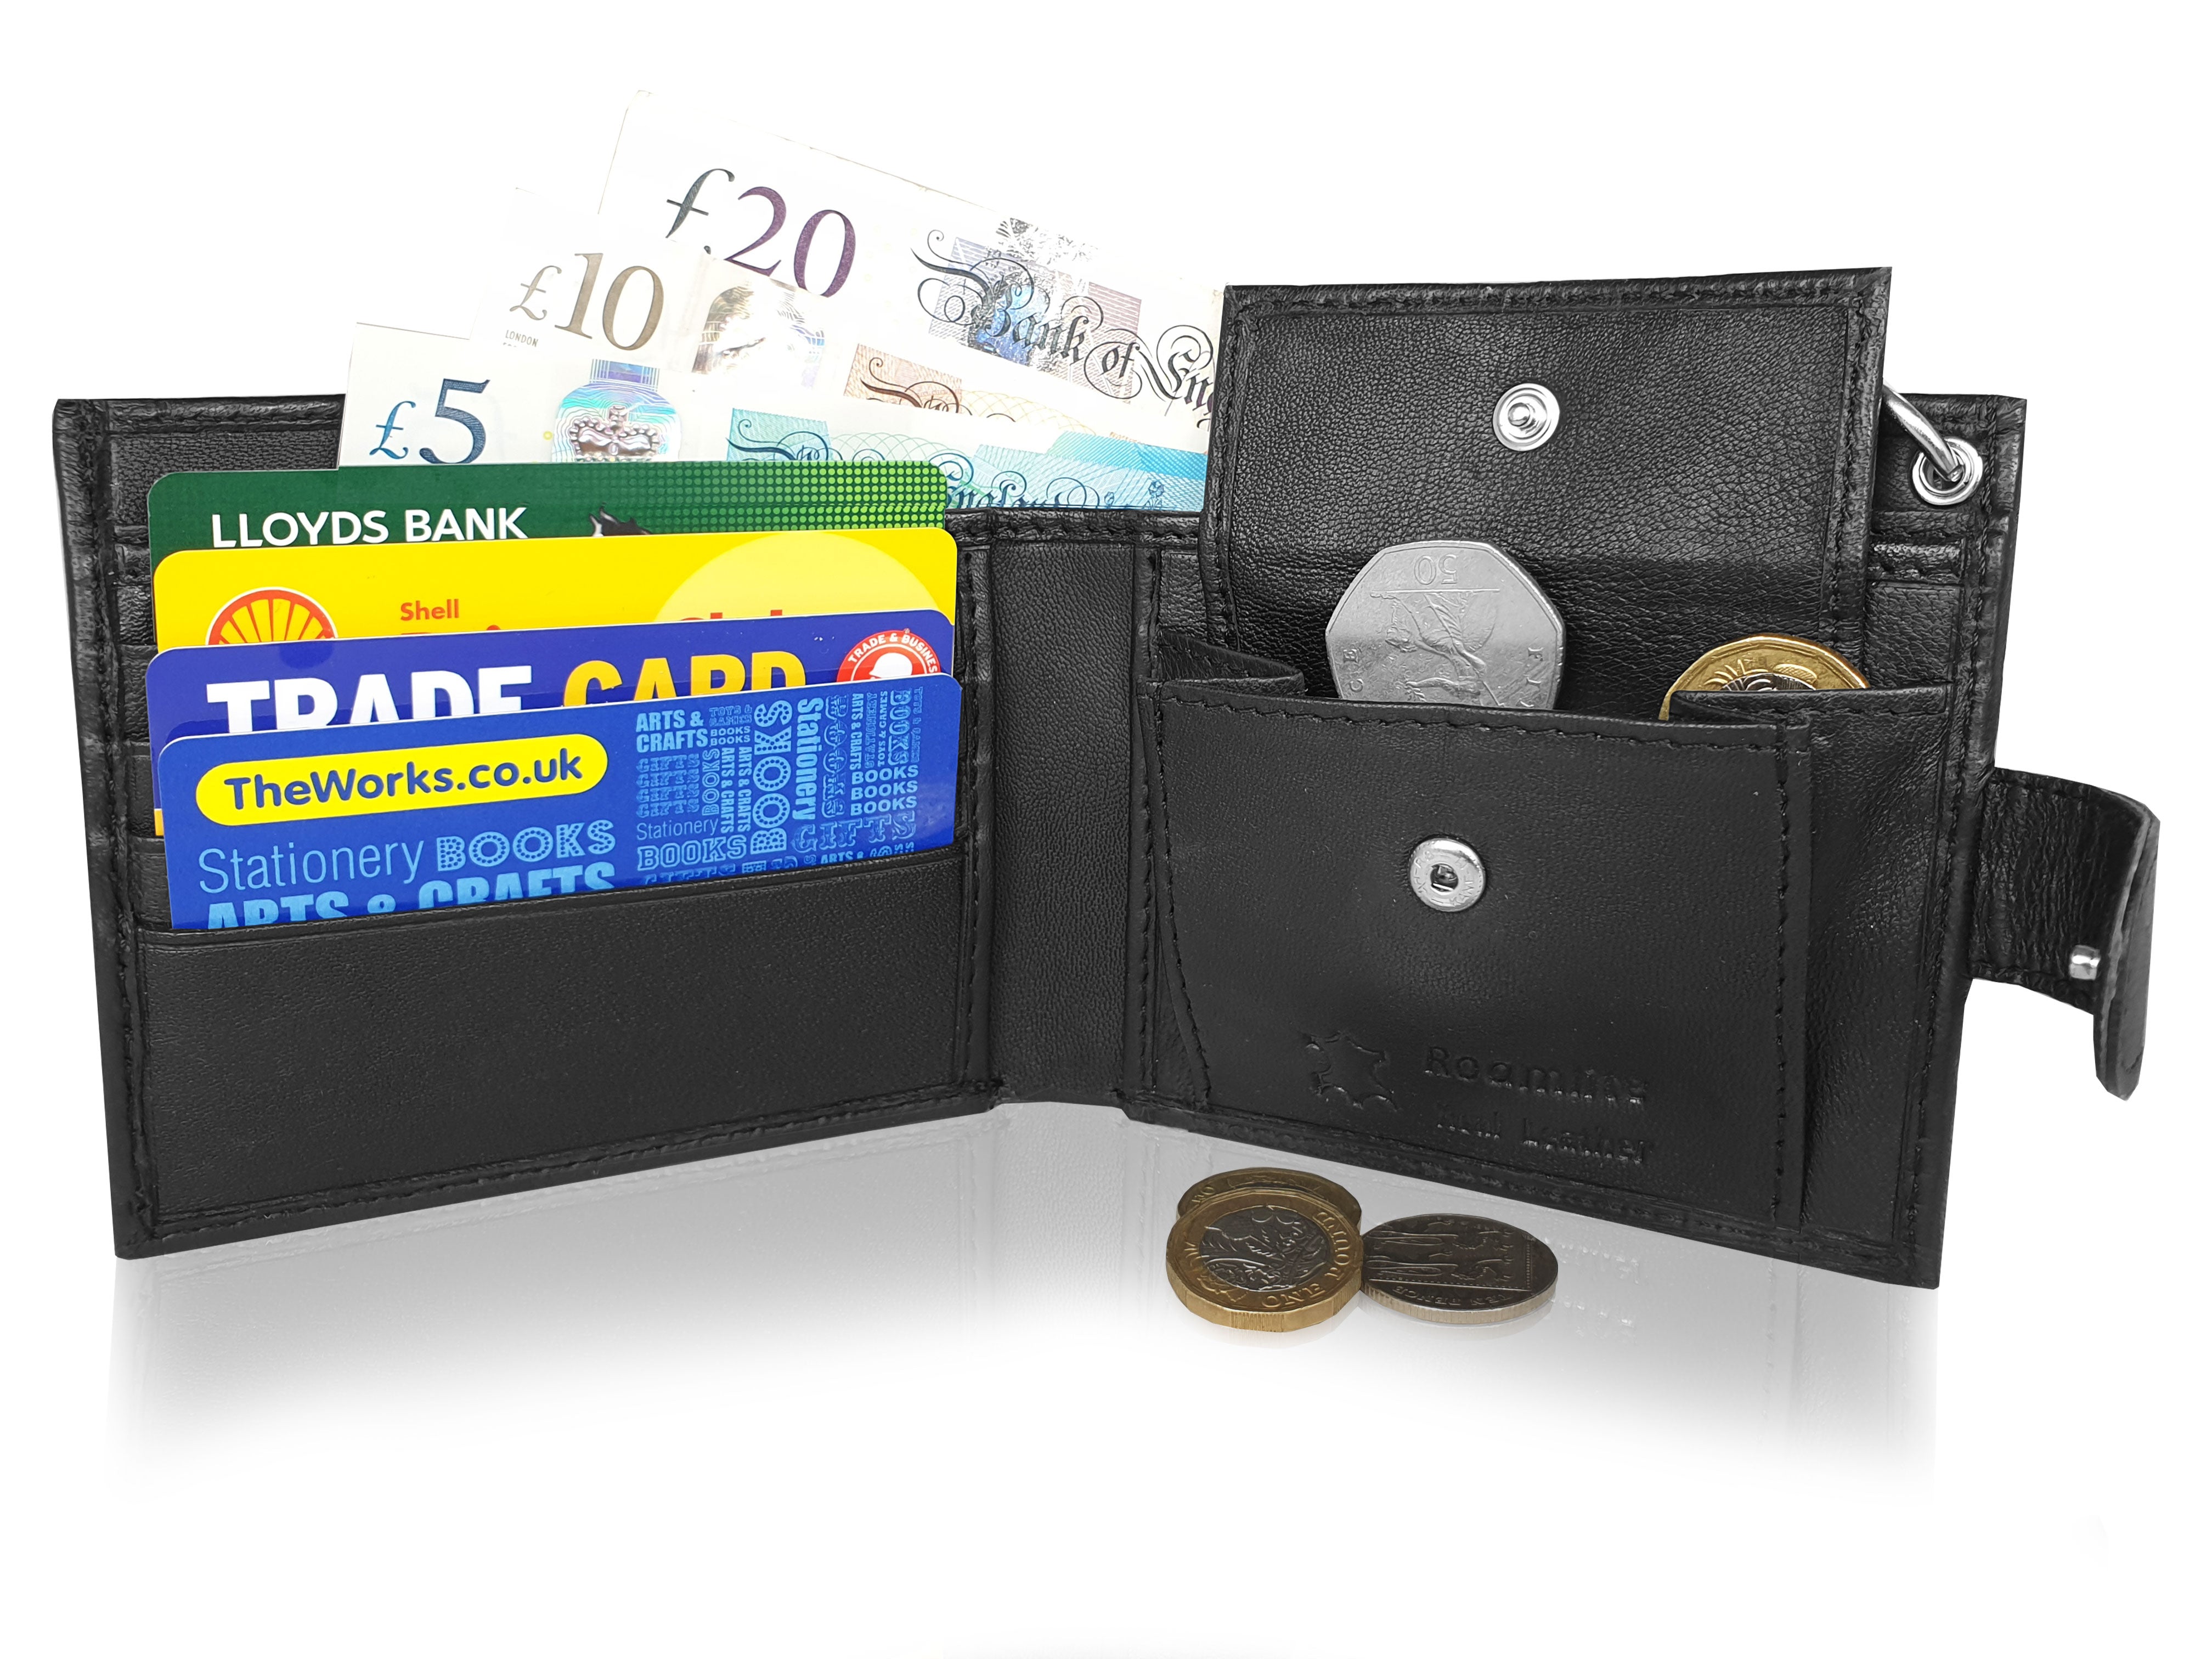 Leather Men's Chained Wallet, RFID Protected Card Slots, Coin Pocket - Mans Gift